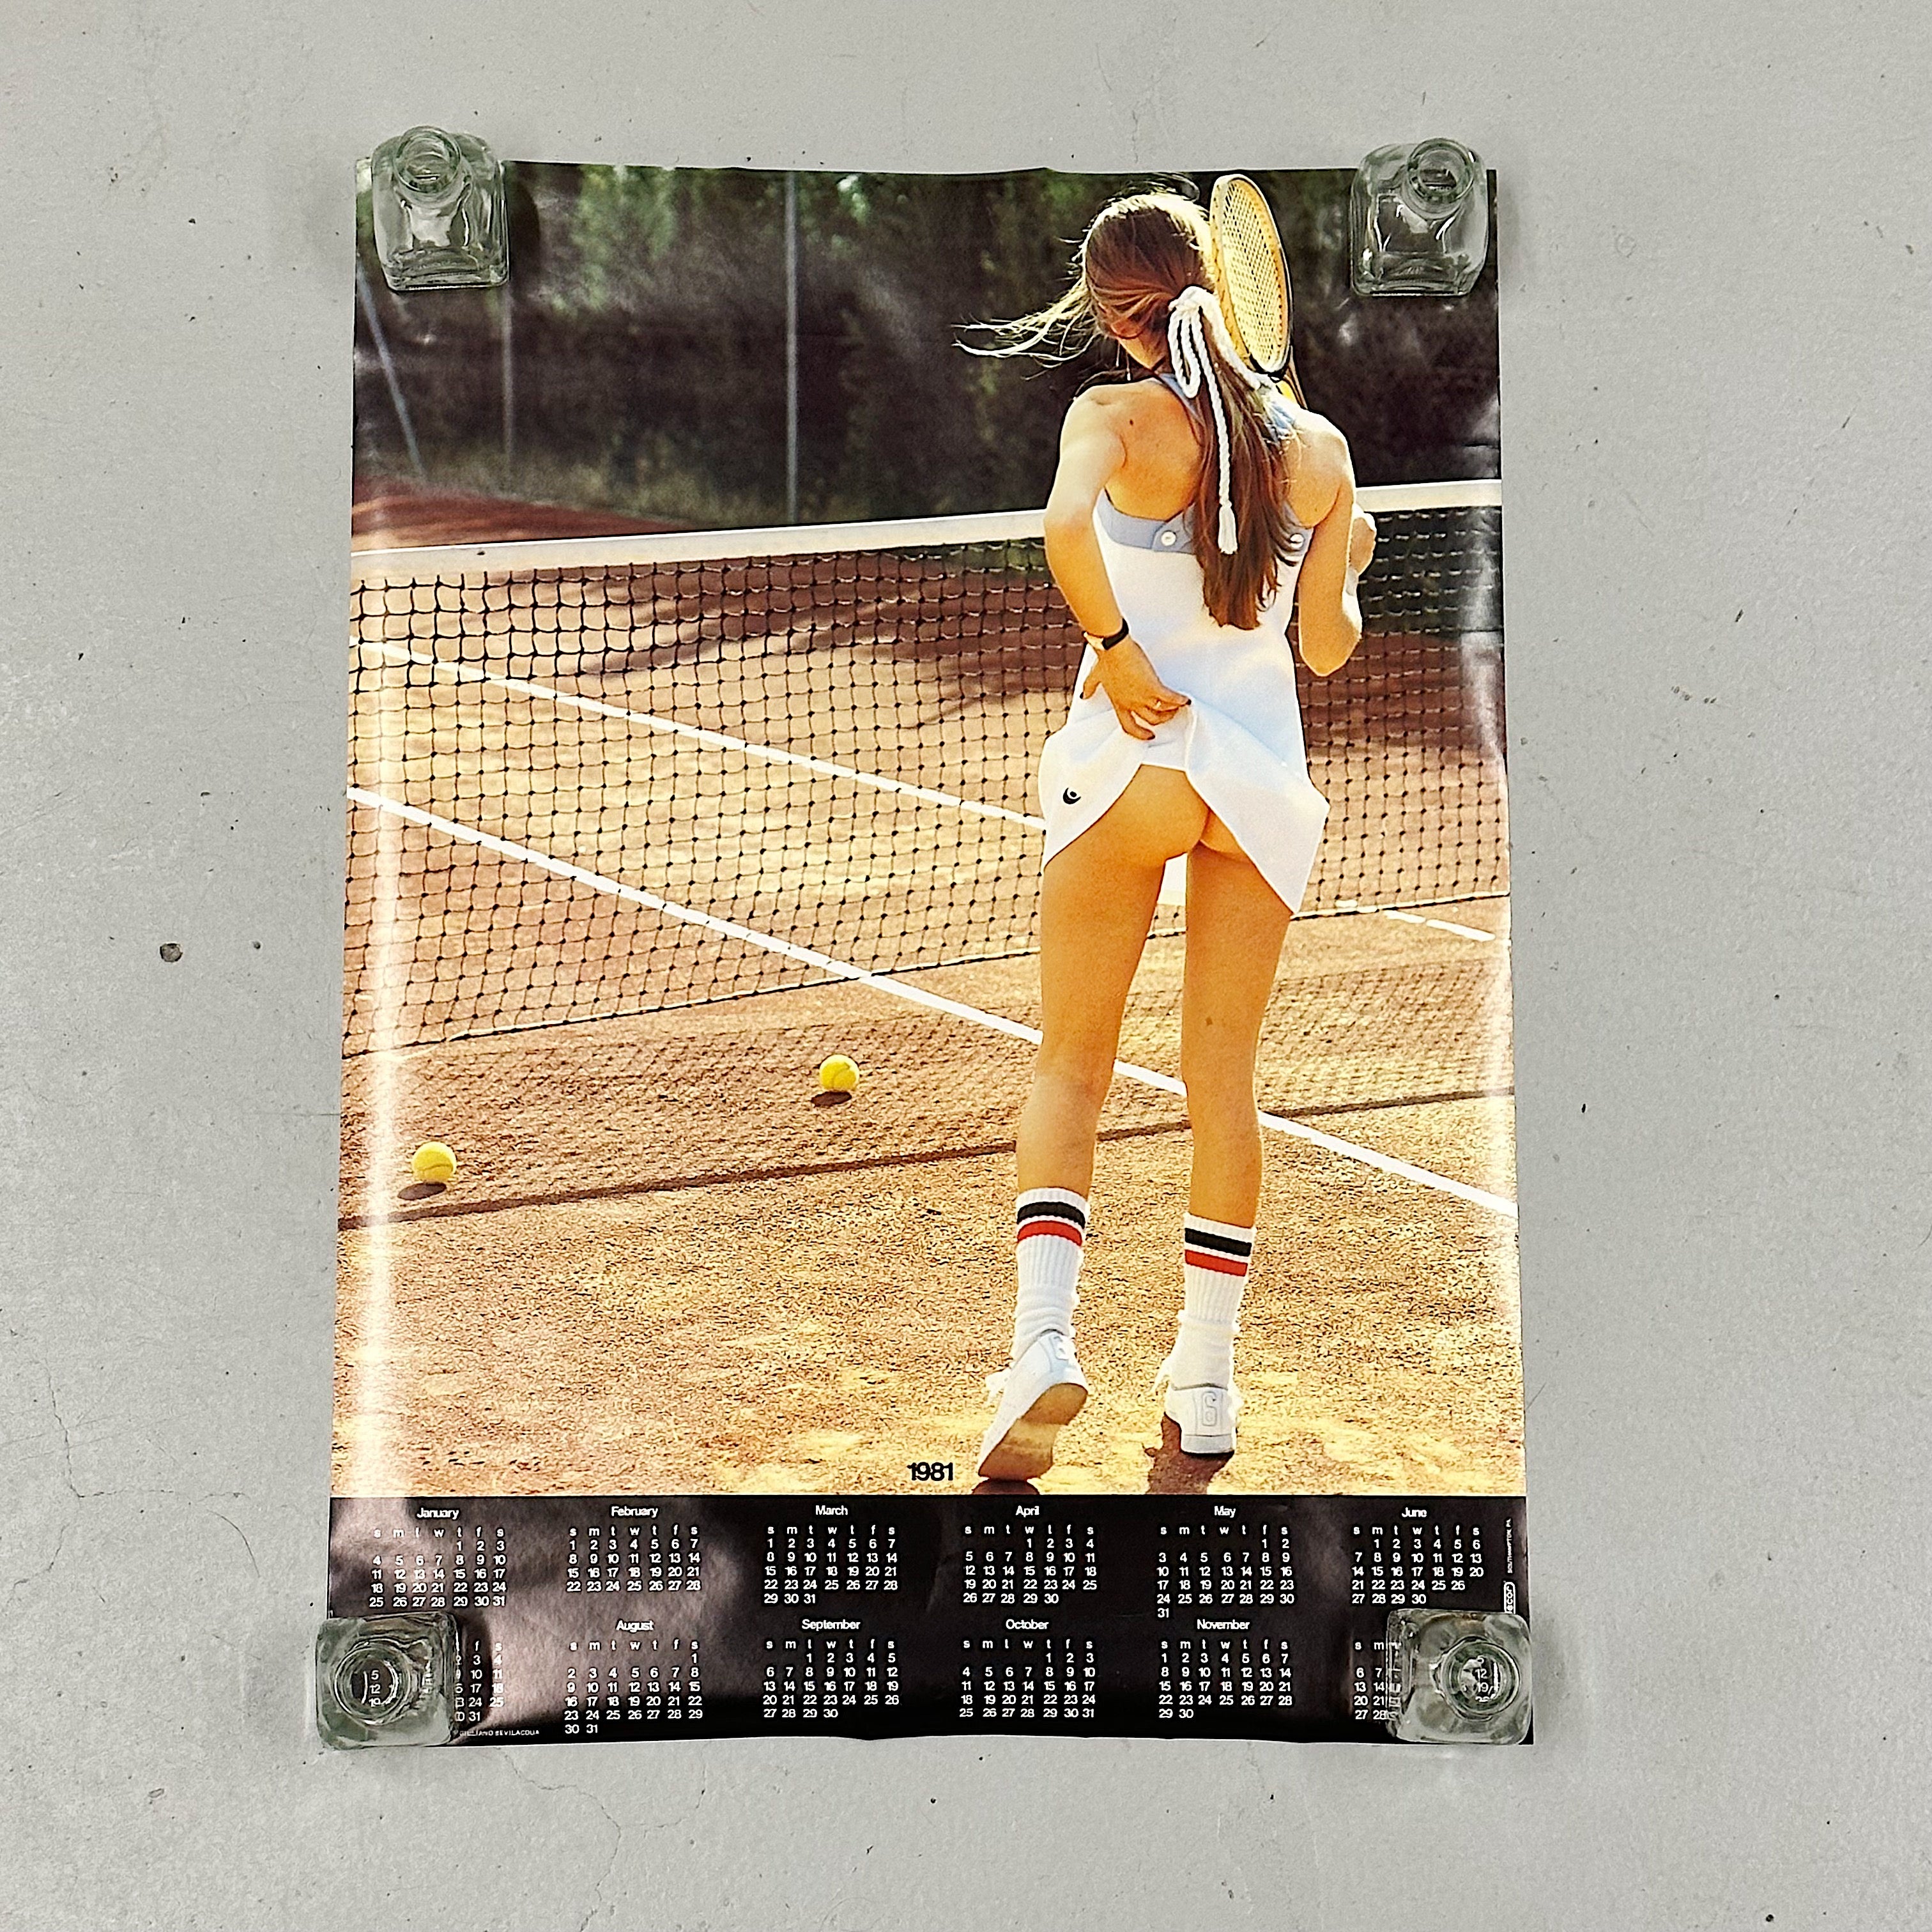 Rare 1980s Tennis Poster with Calendar by Scandecor - 1981 Calendars - Vintage Posters - Sexy Wall Art - Erotic Posters Nude